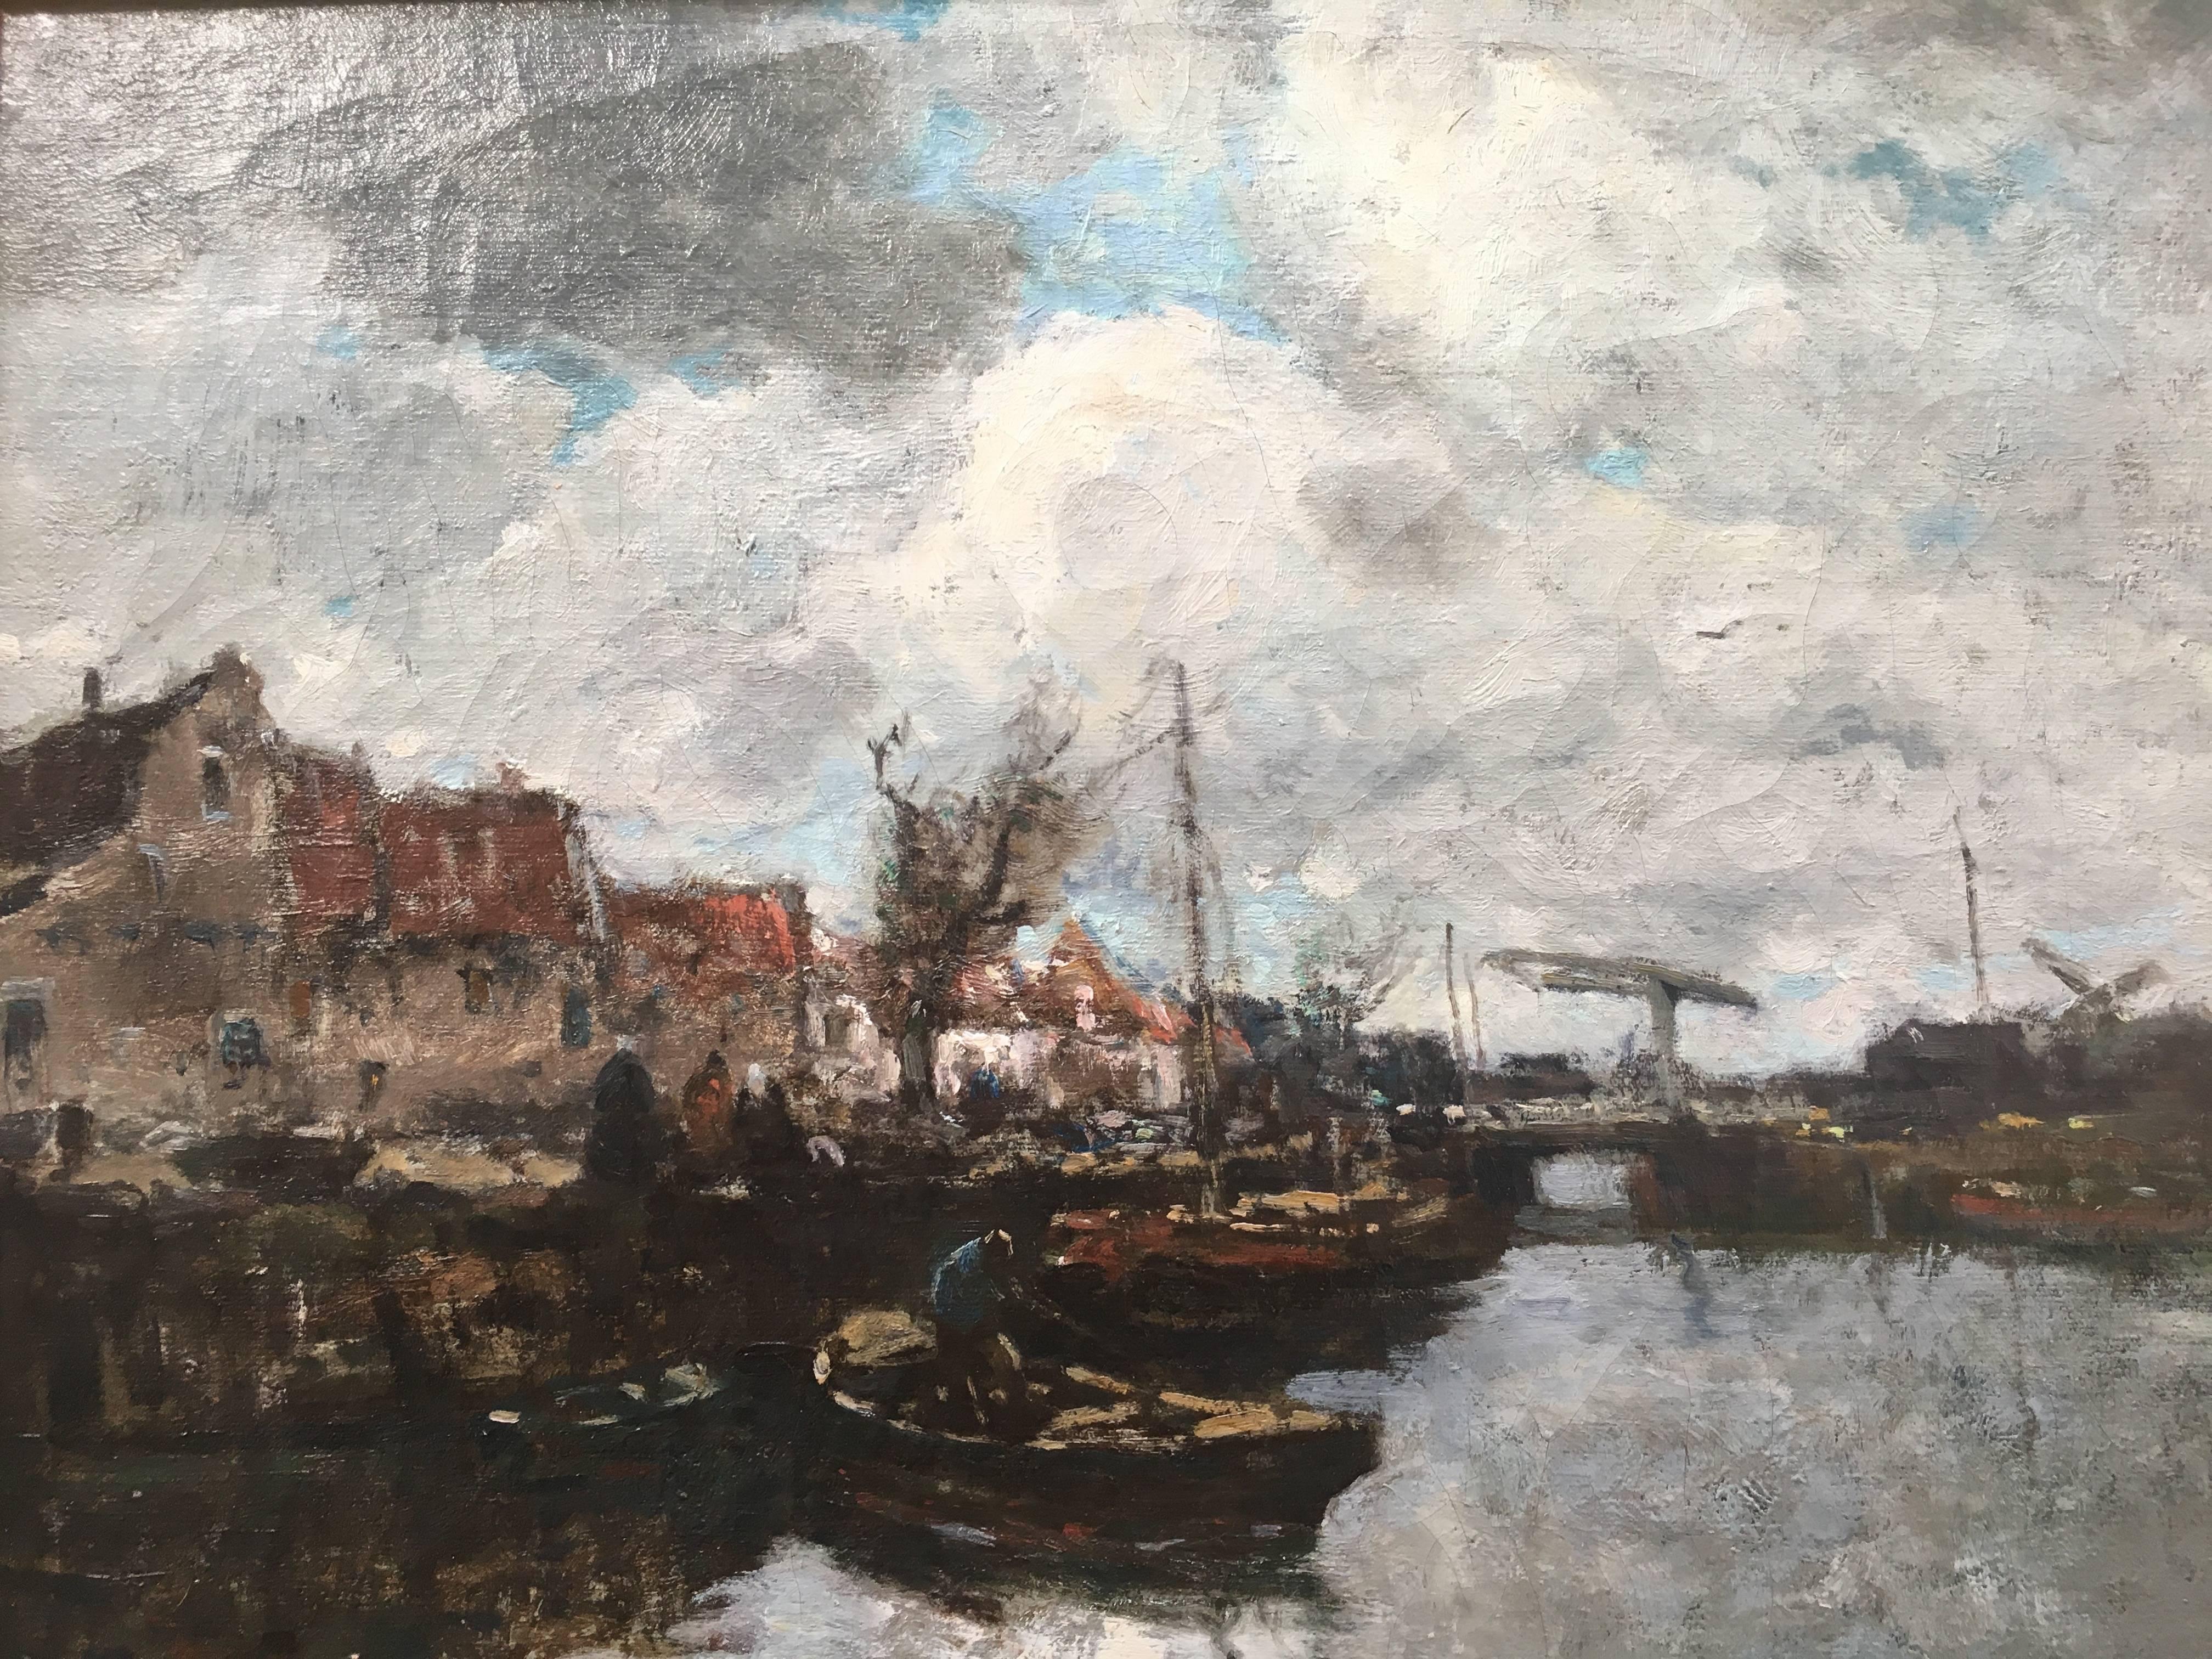 Boats in the Harbor - Impressionist Painting by William Ritschel